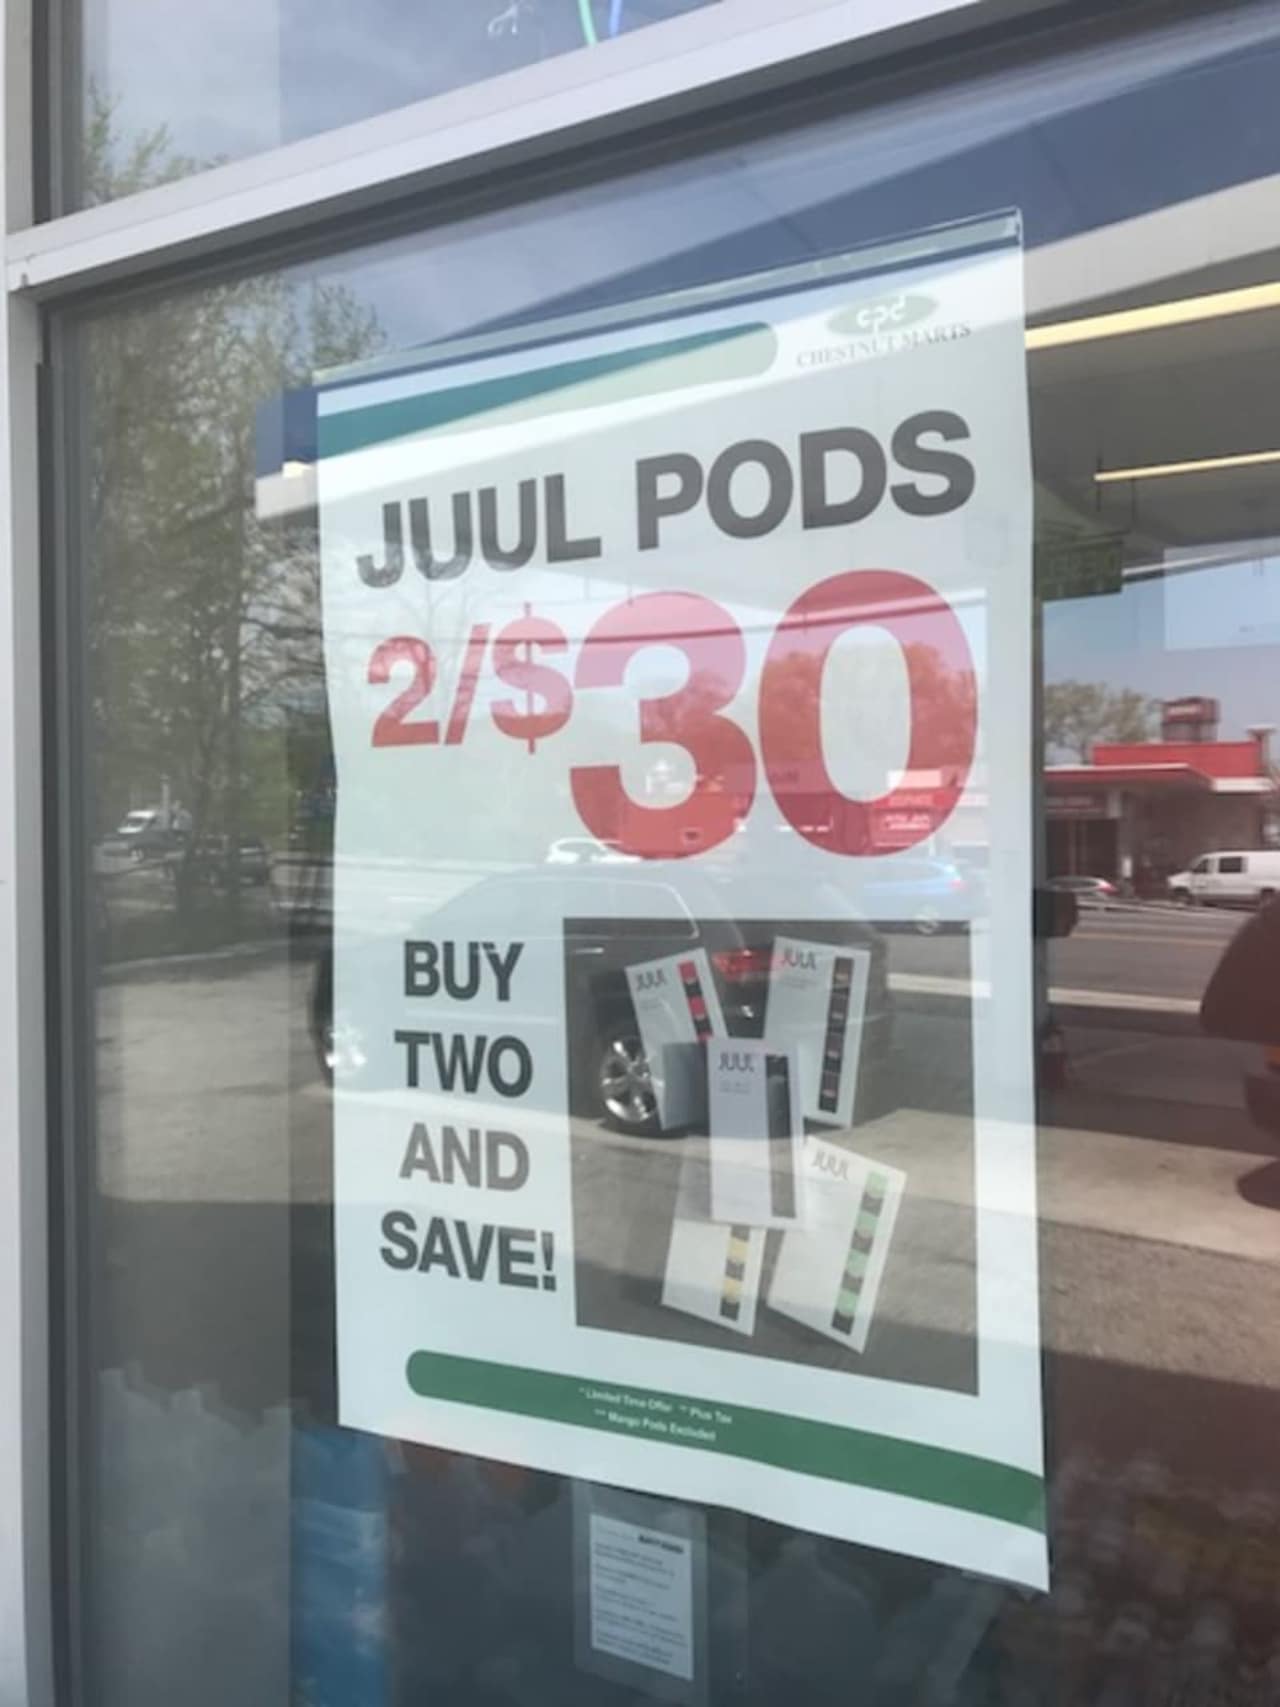 Westchester County has upped the age for buying tobacco and "vape" products to 21. A pod of JUUL contains an amount of nicotine equal to an entire pack of conventional cigarettes. The e-cig is a popular sales item at many area gas stations and delis.